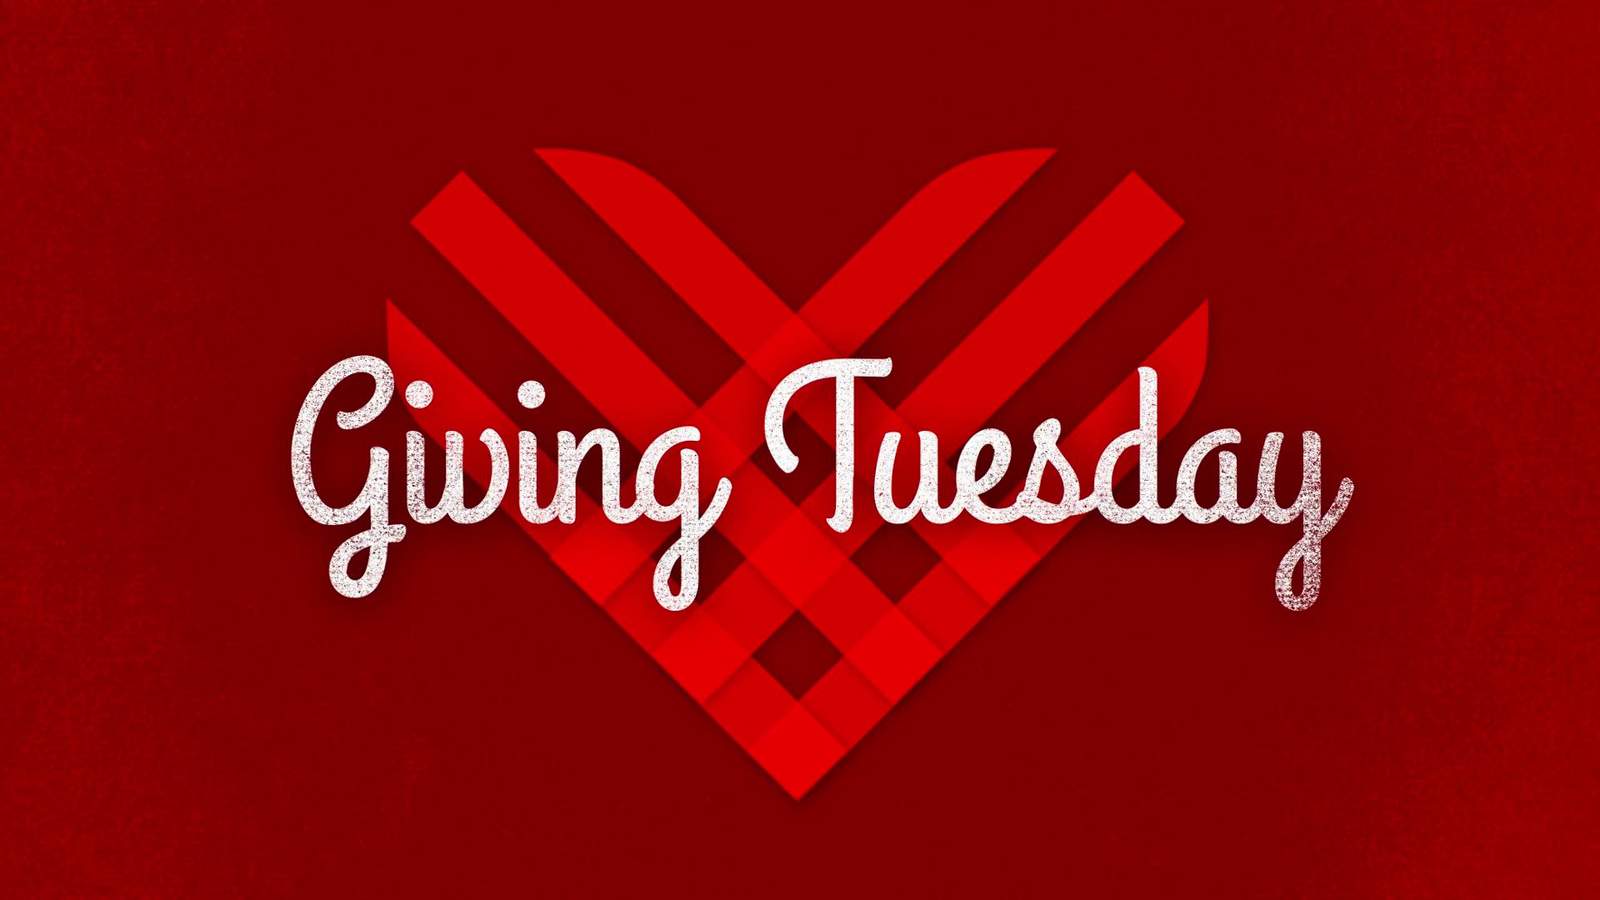 Nonprofits are facing an unprecedented need this Giving Tuesday